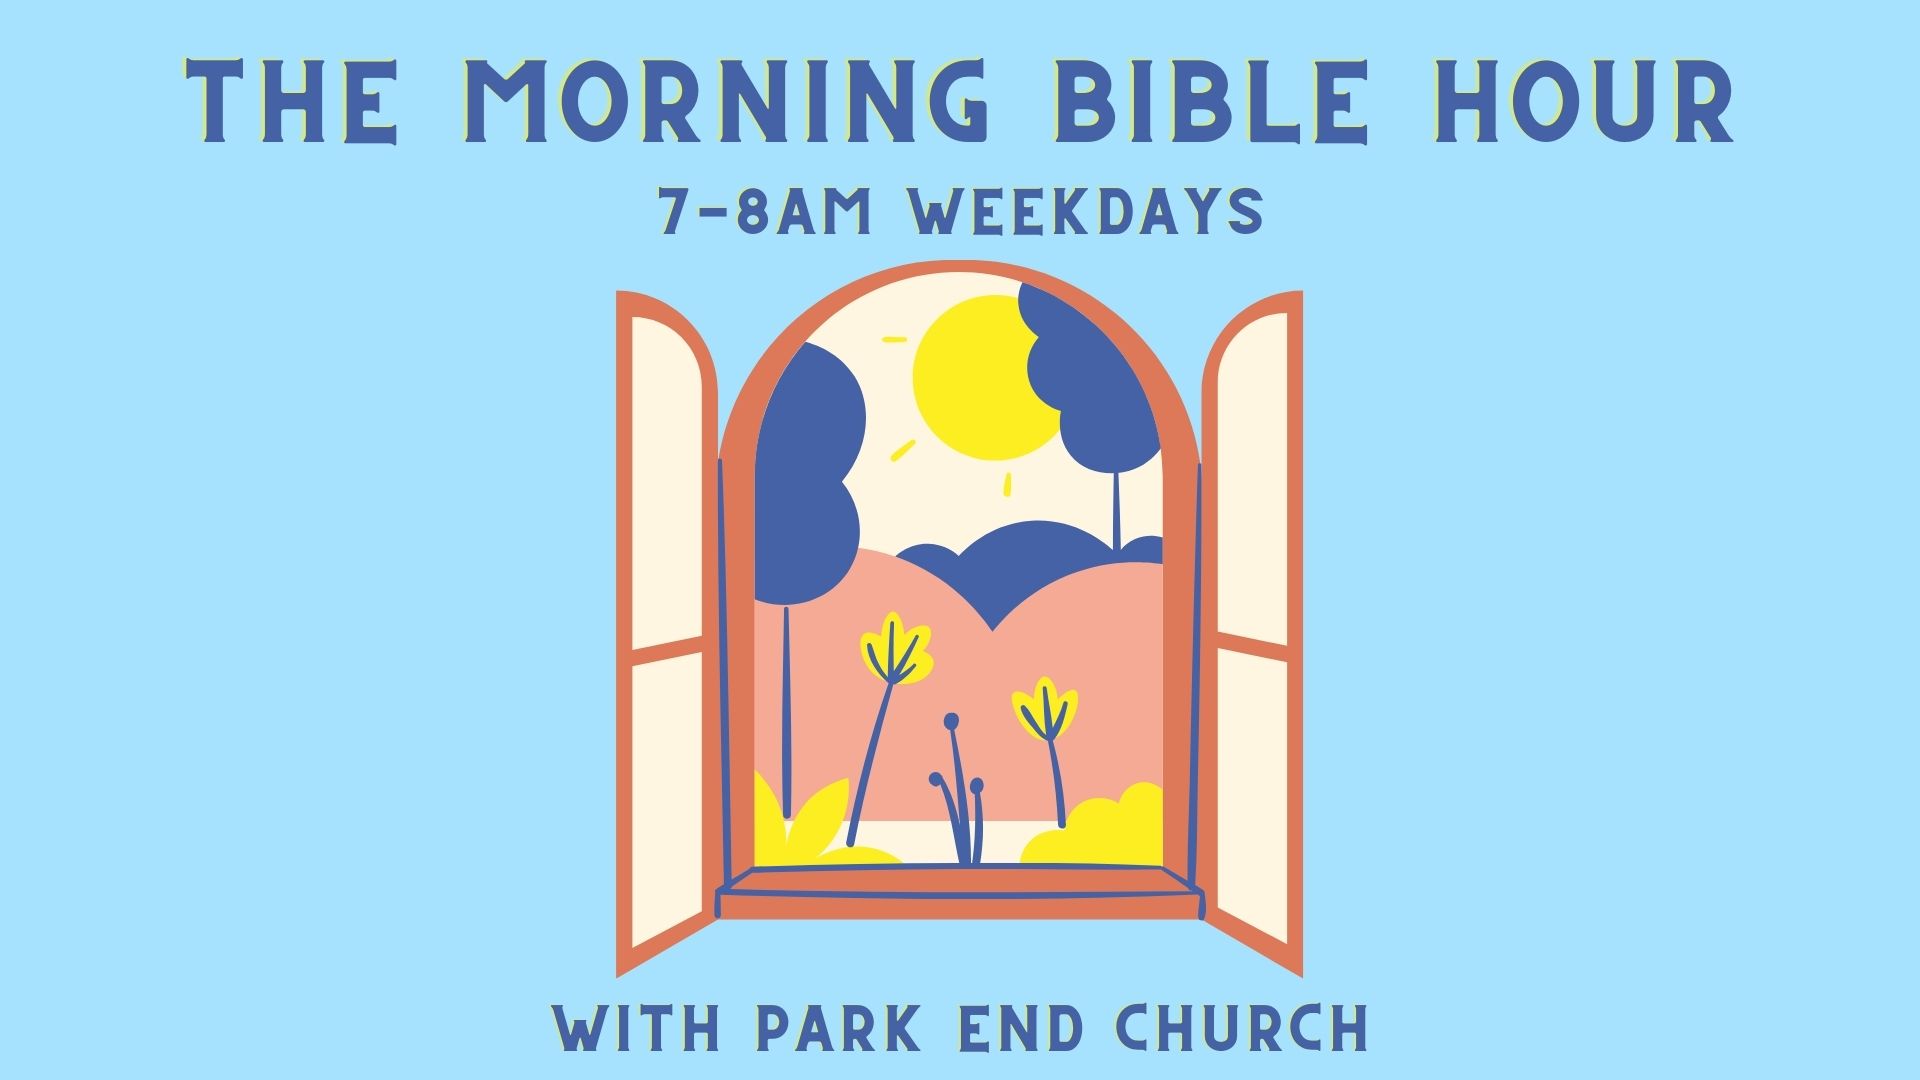 The Morning Bible Hour